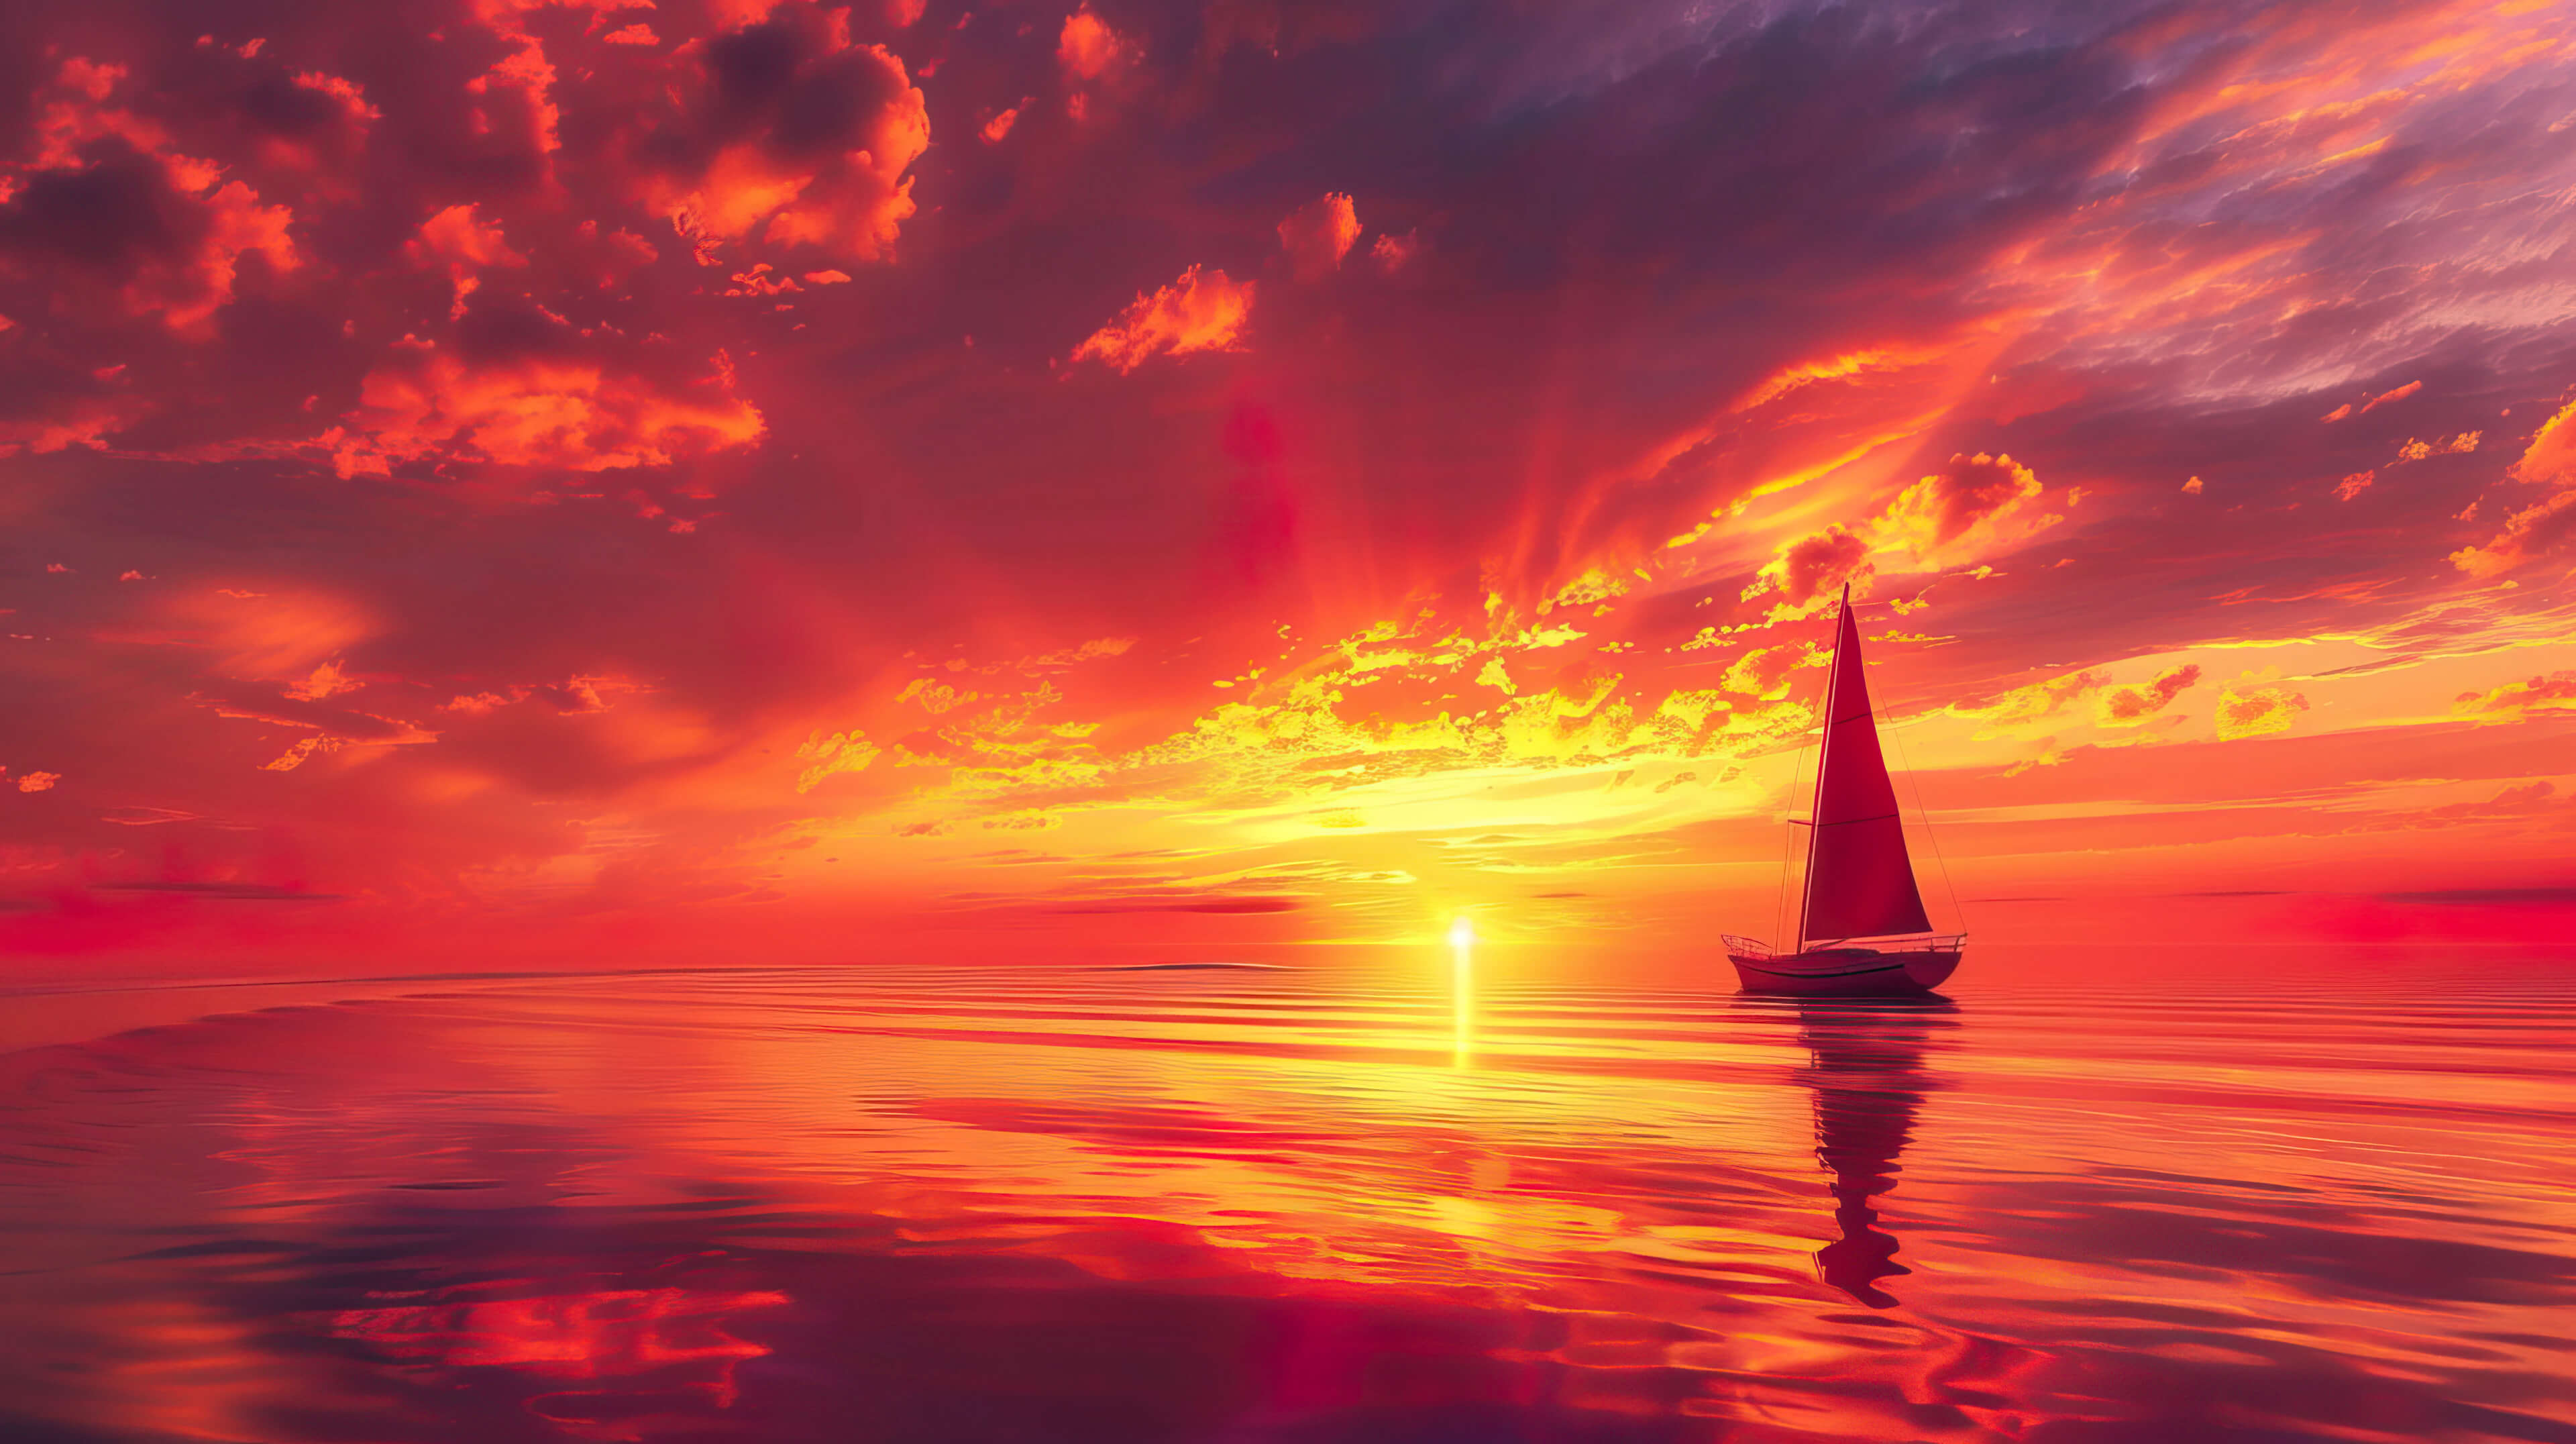 A sailboat stands out in silhouette against the vibrant orange and pink hues of a dramatic ocean sunset reflecting on the water